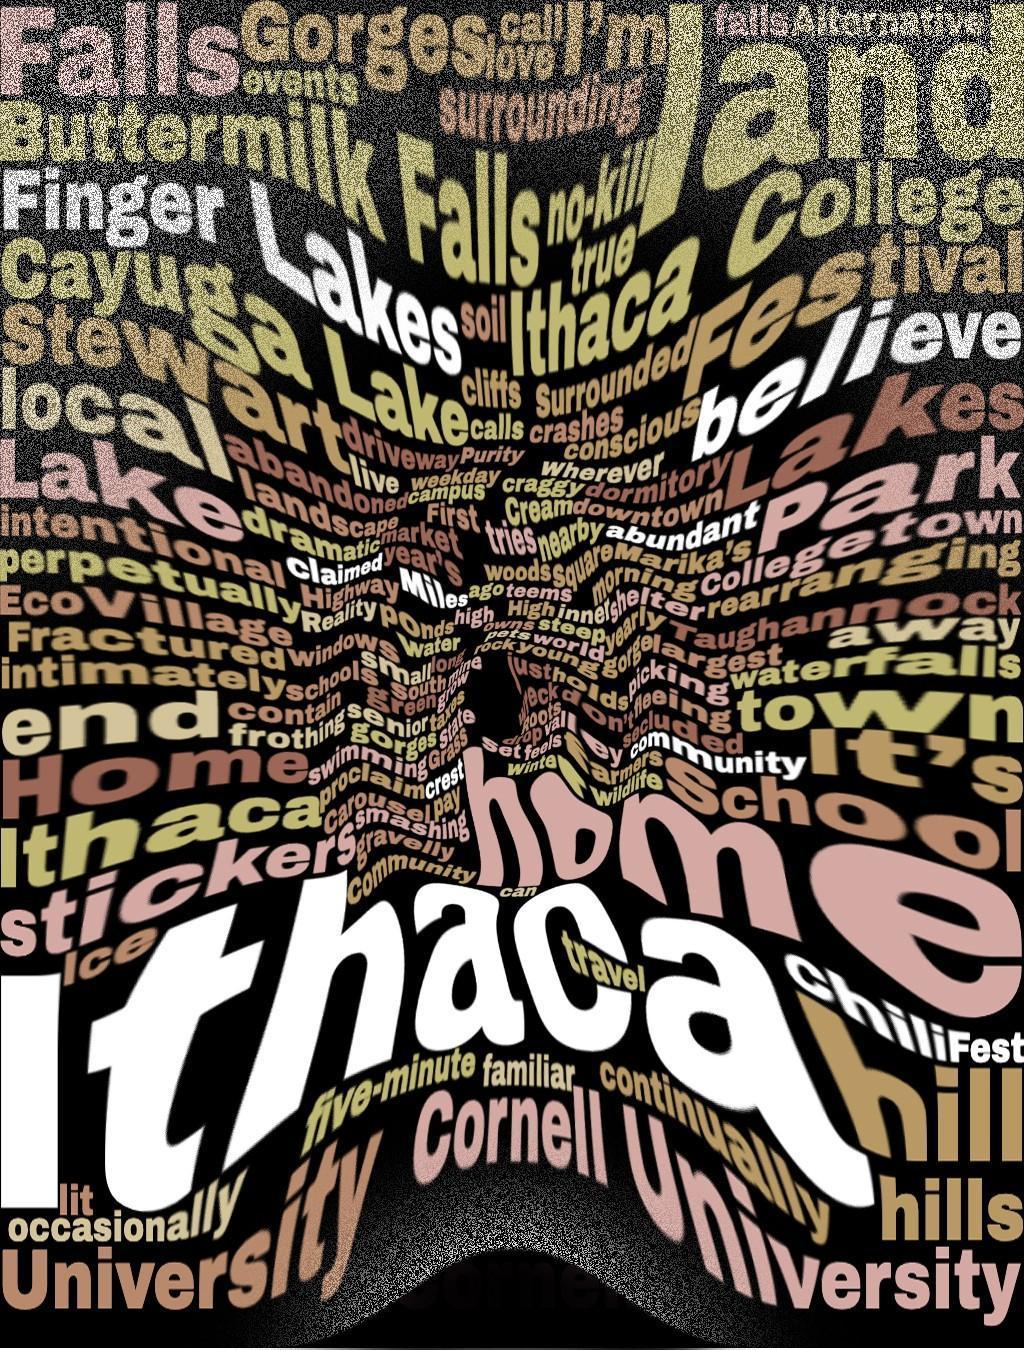 Robin Botie of Ithaca, New York, photoshops layers of a word cloud to illustrate the stae of her home at the time of her daughter's cancer diagnosis.